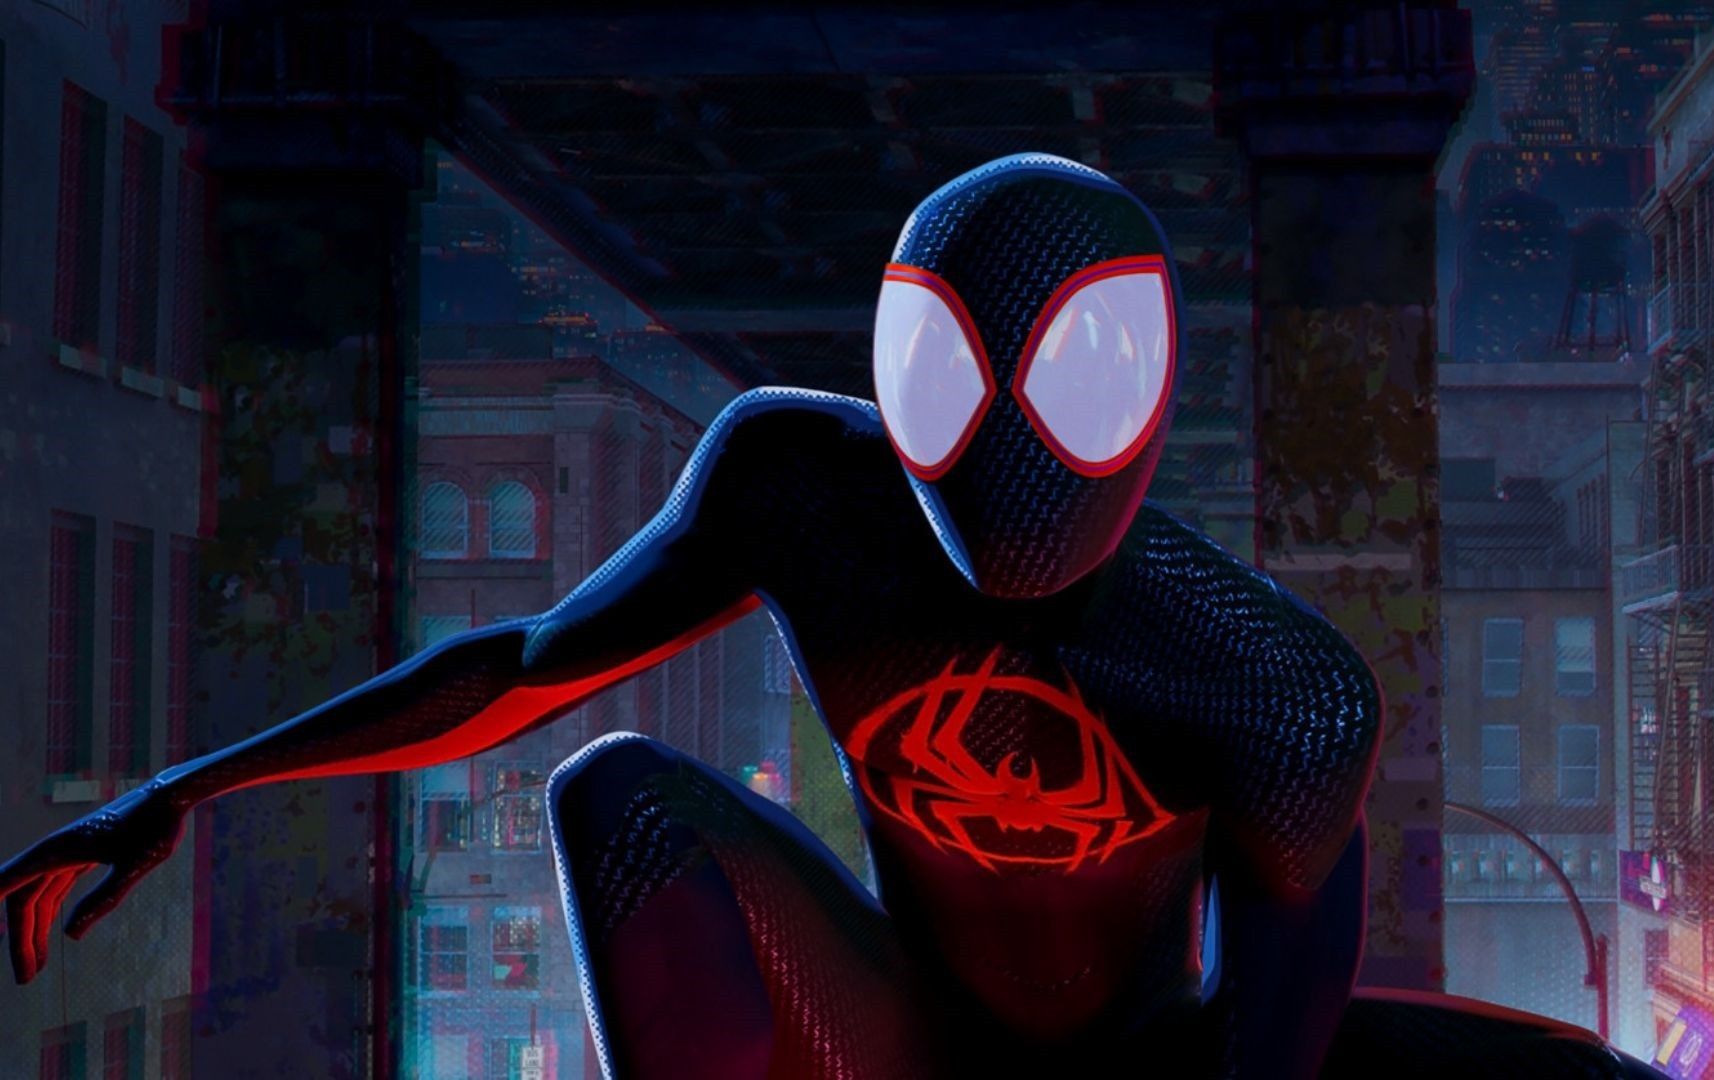 More 'Spider-Man' movies are on the way â�� producers